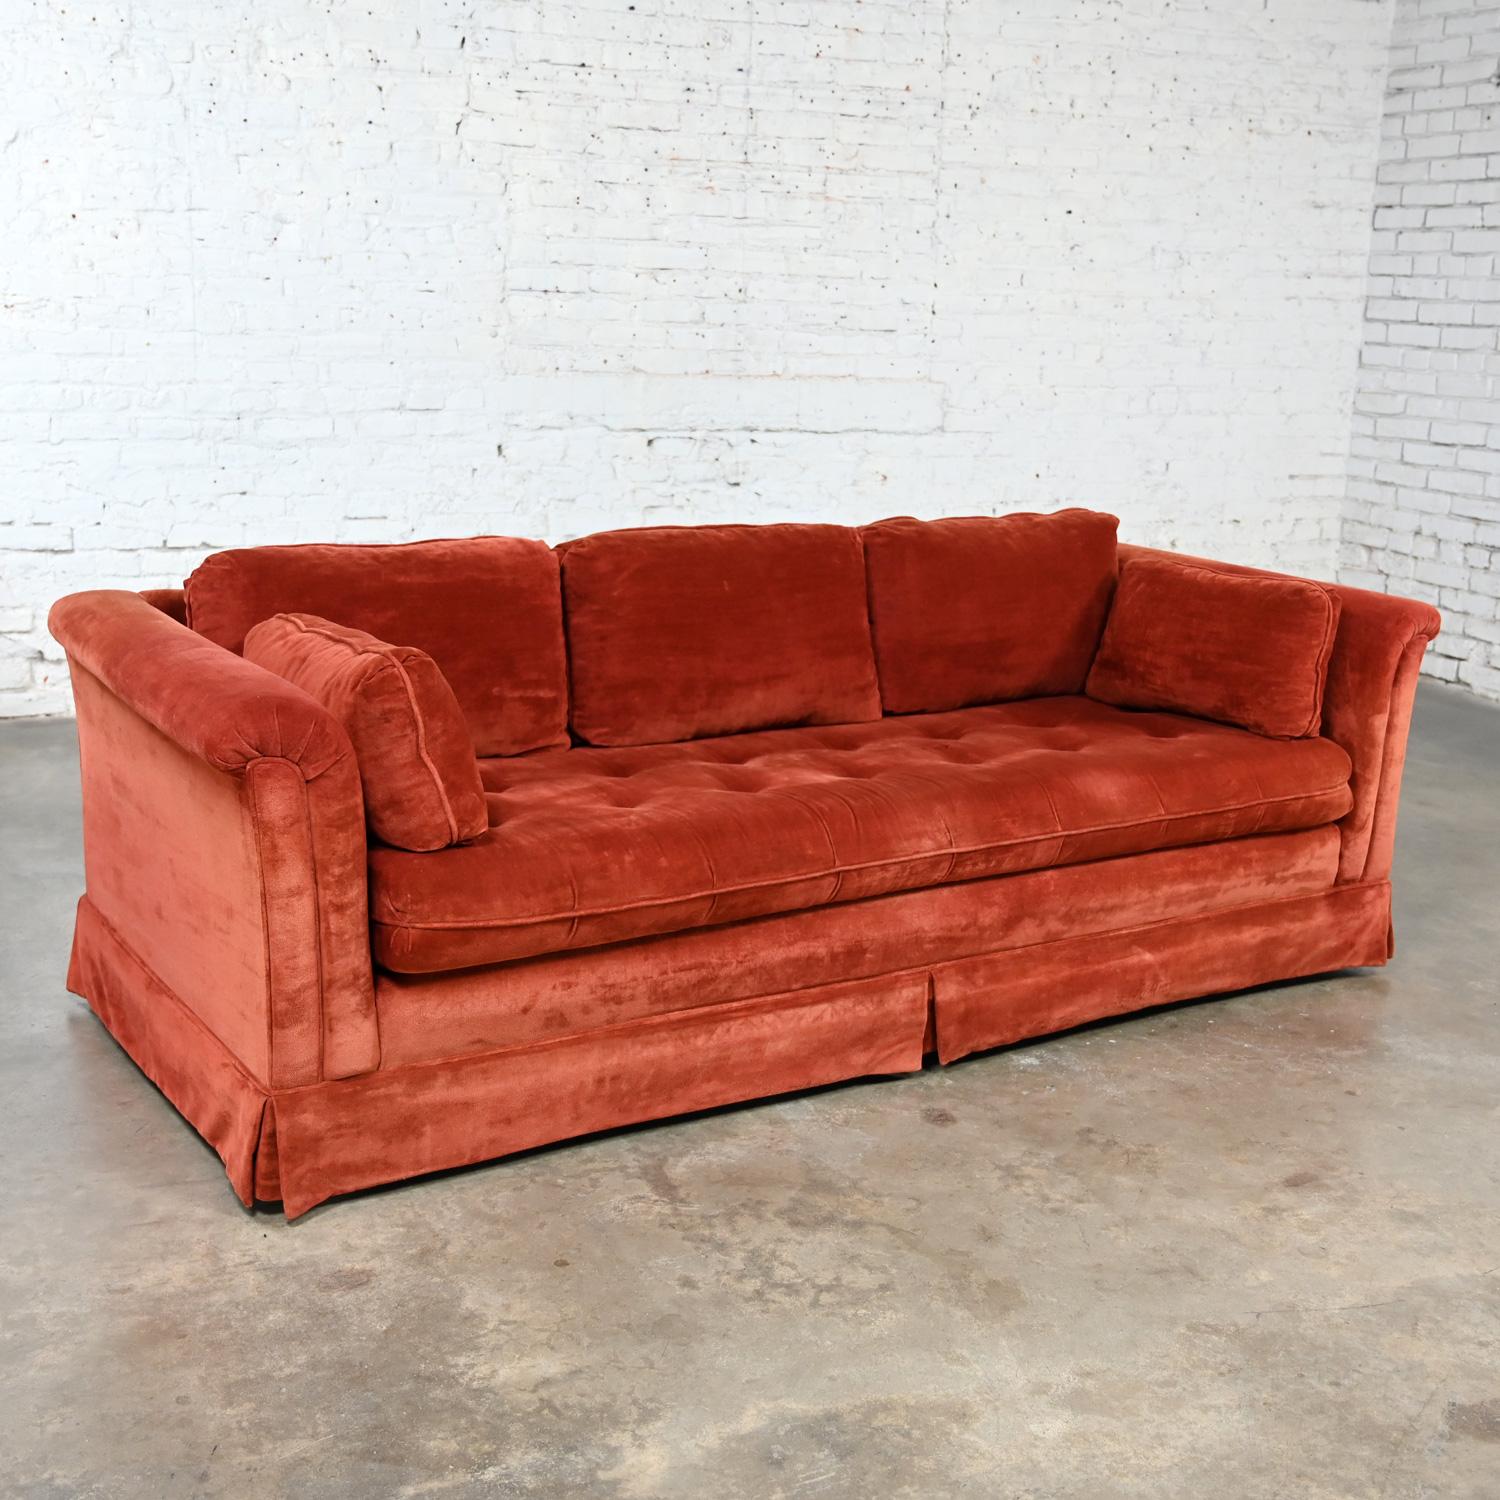 Marvelous vintage original orange chenille tuxedo sofa with rolled arms by Stratford designs a division of Futorian Manufacturing Company. Comprised of tuxedo frame, rolled arms, 3 back & 2 arm ground foam filled cushions, 1 foam bench seat cushion